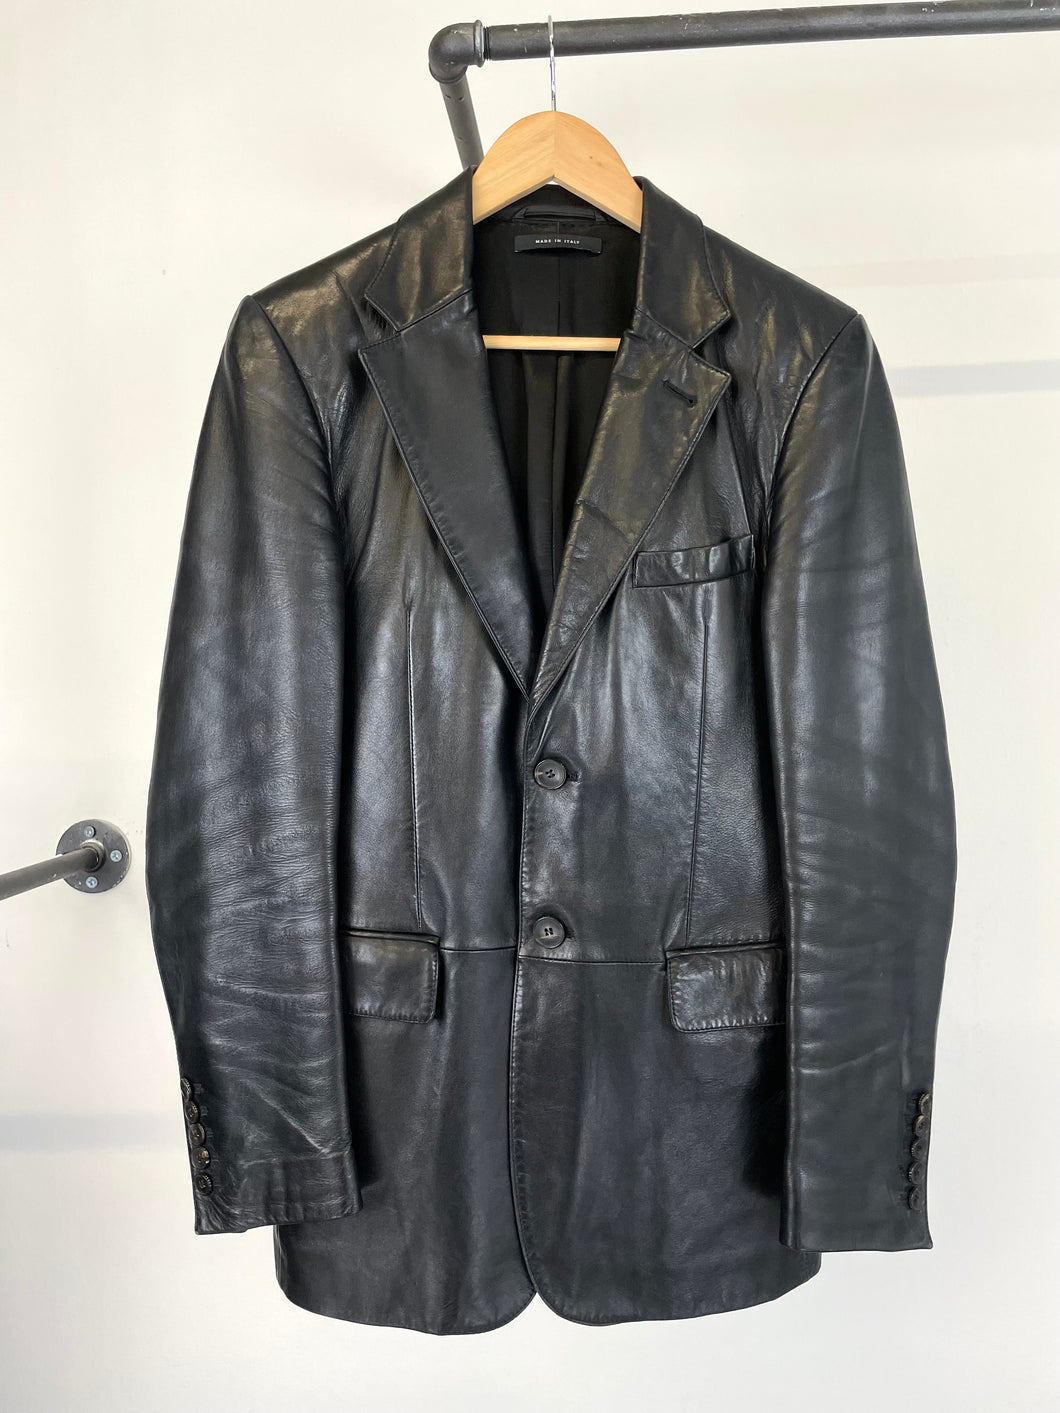 Gucci by Tom Ford leather blazer coat